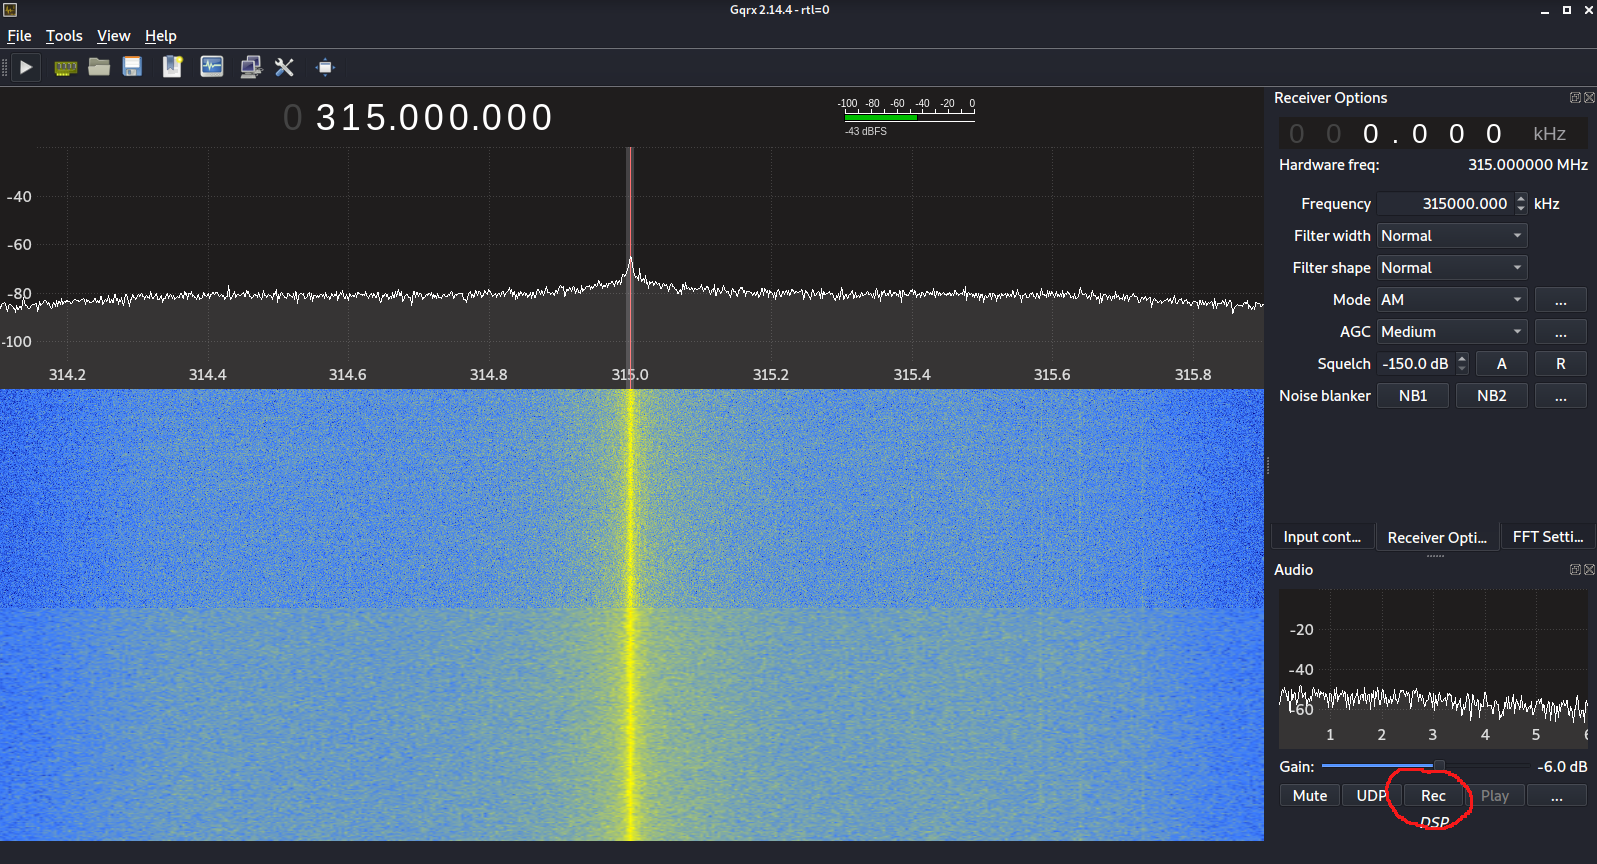 Figure 9. GQRX setting the frequency